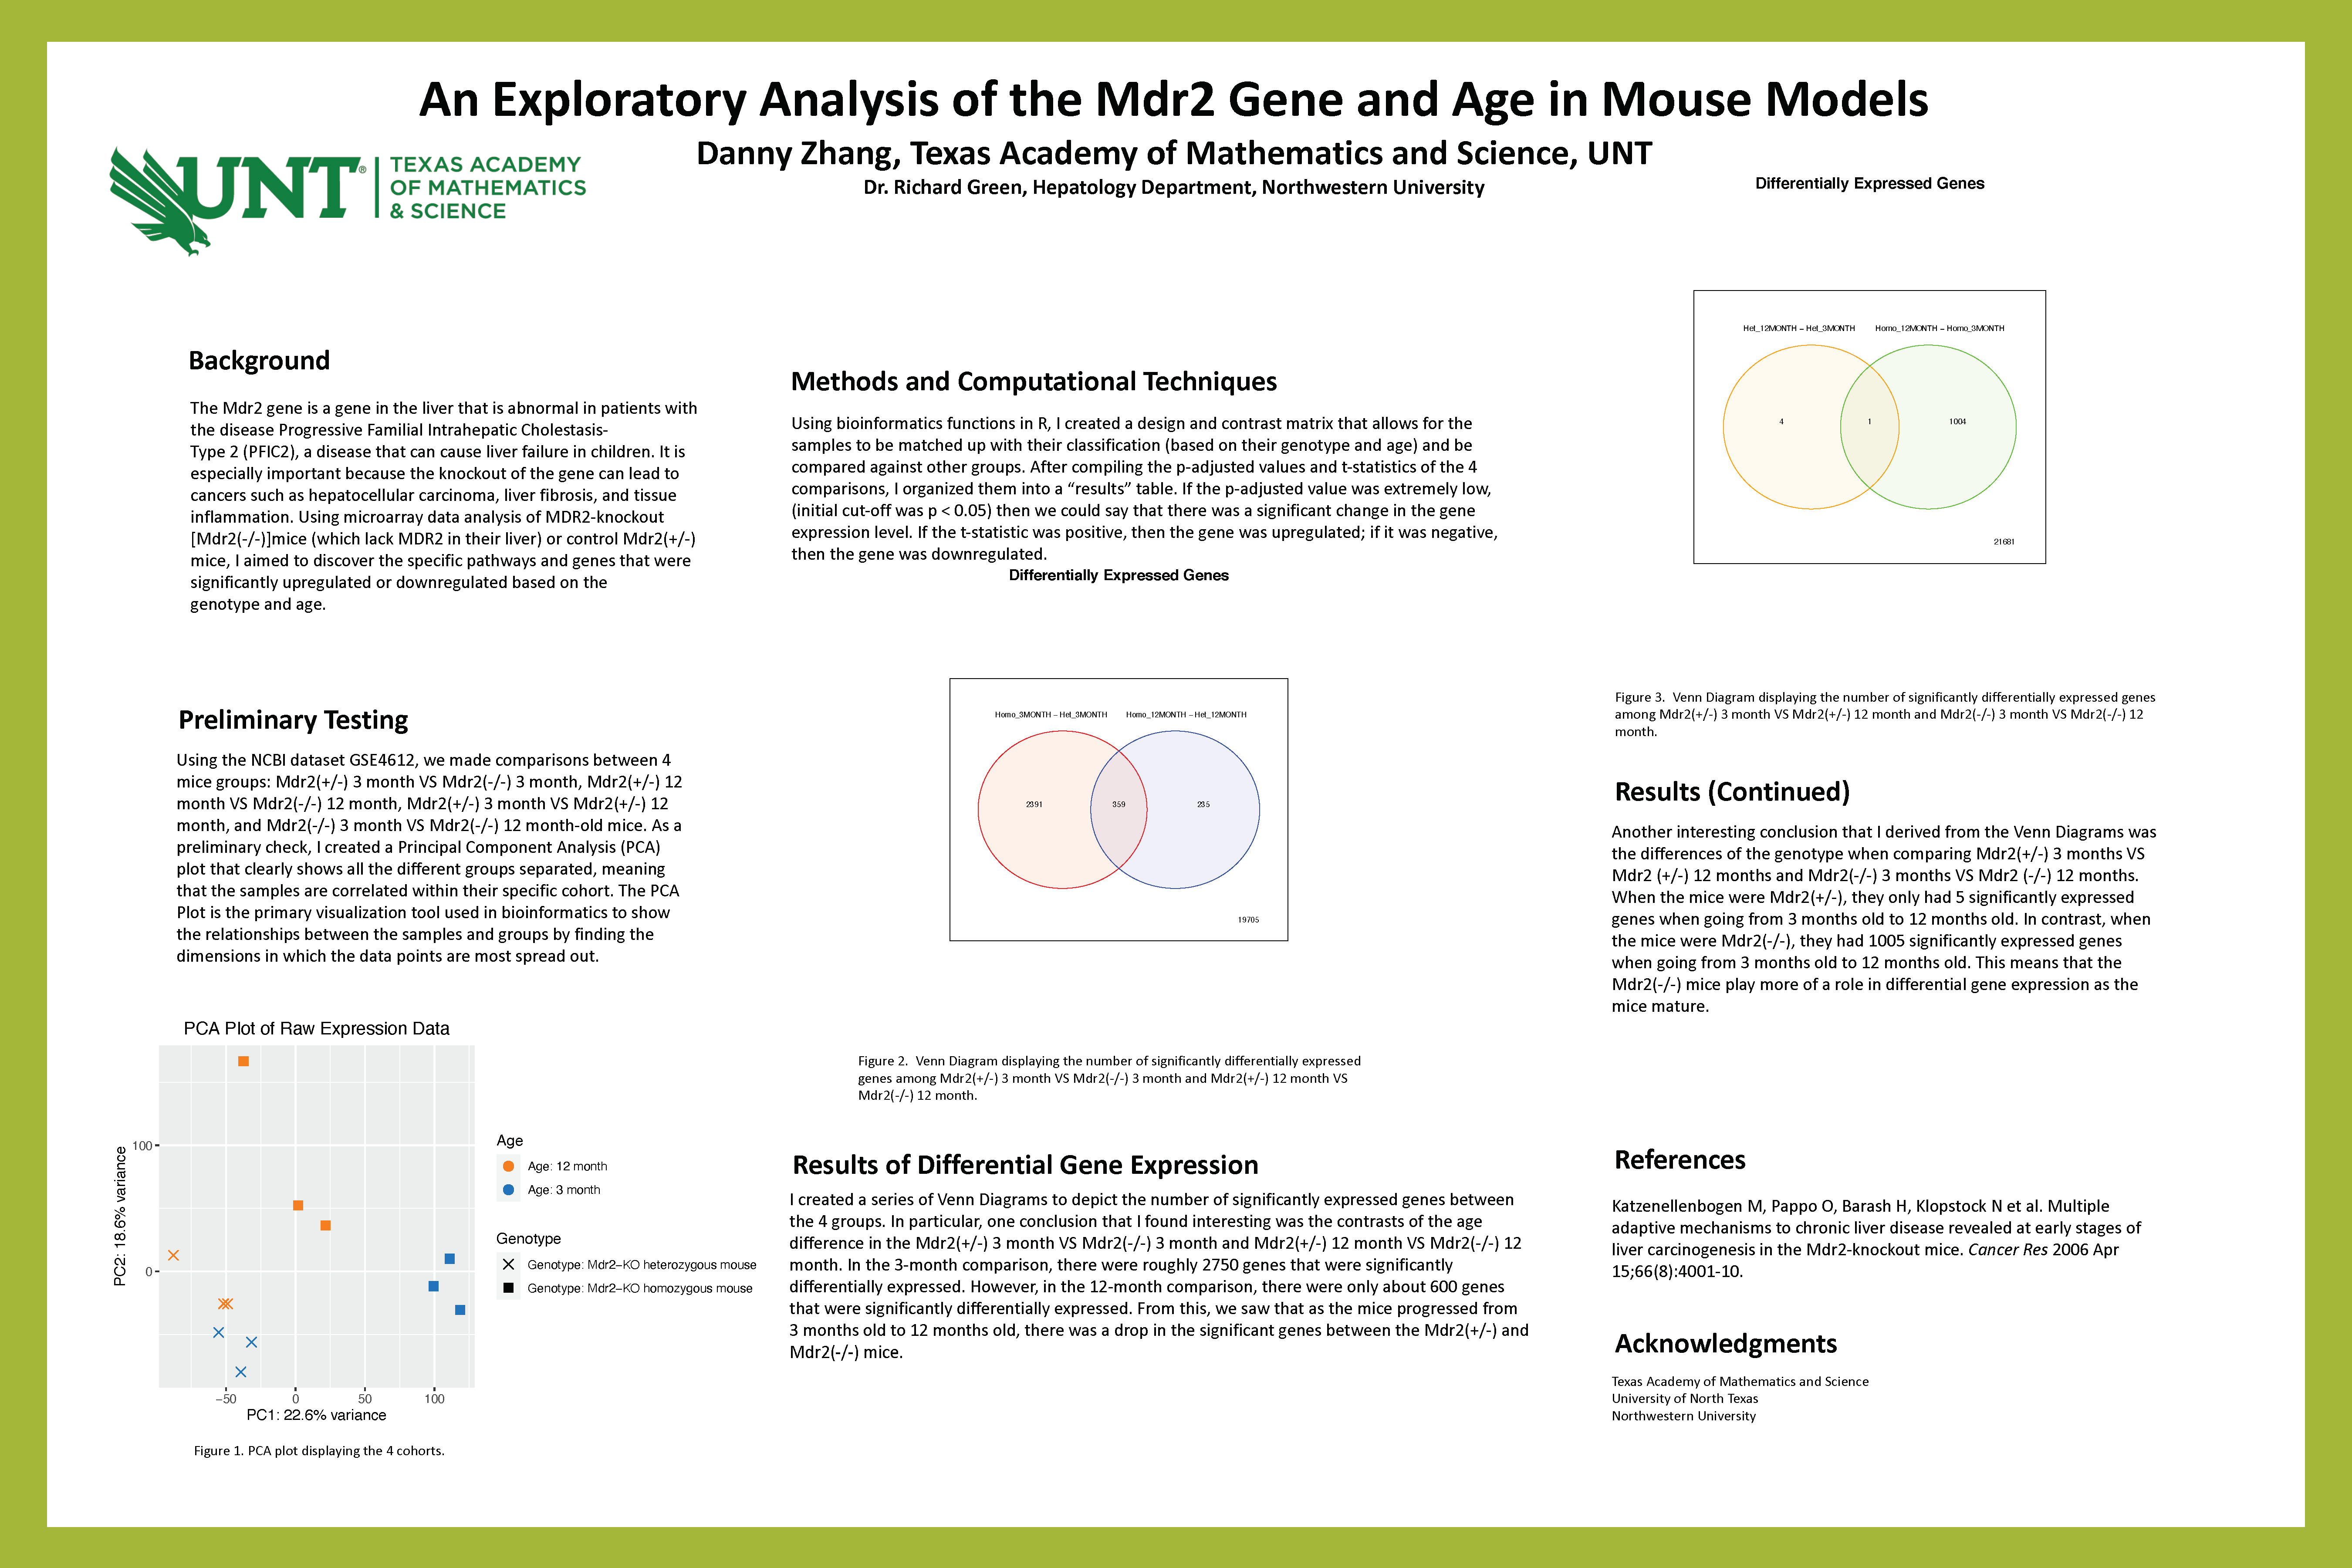 An Exploratory Analysis of the Mdr2 Gene and Age in Mouse Models